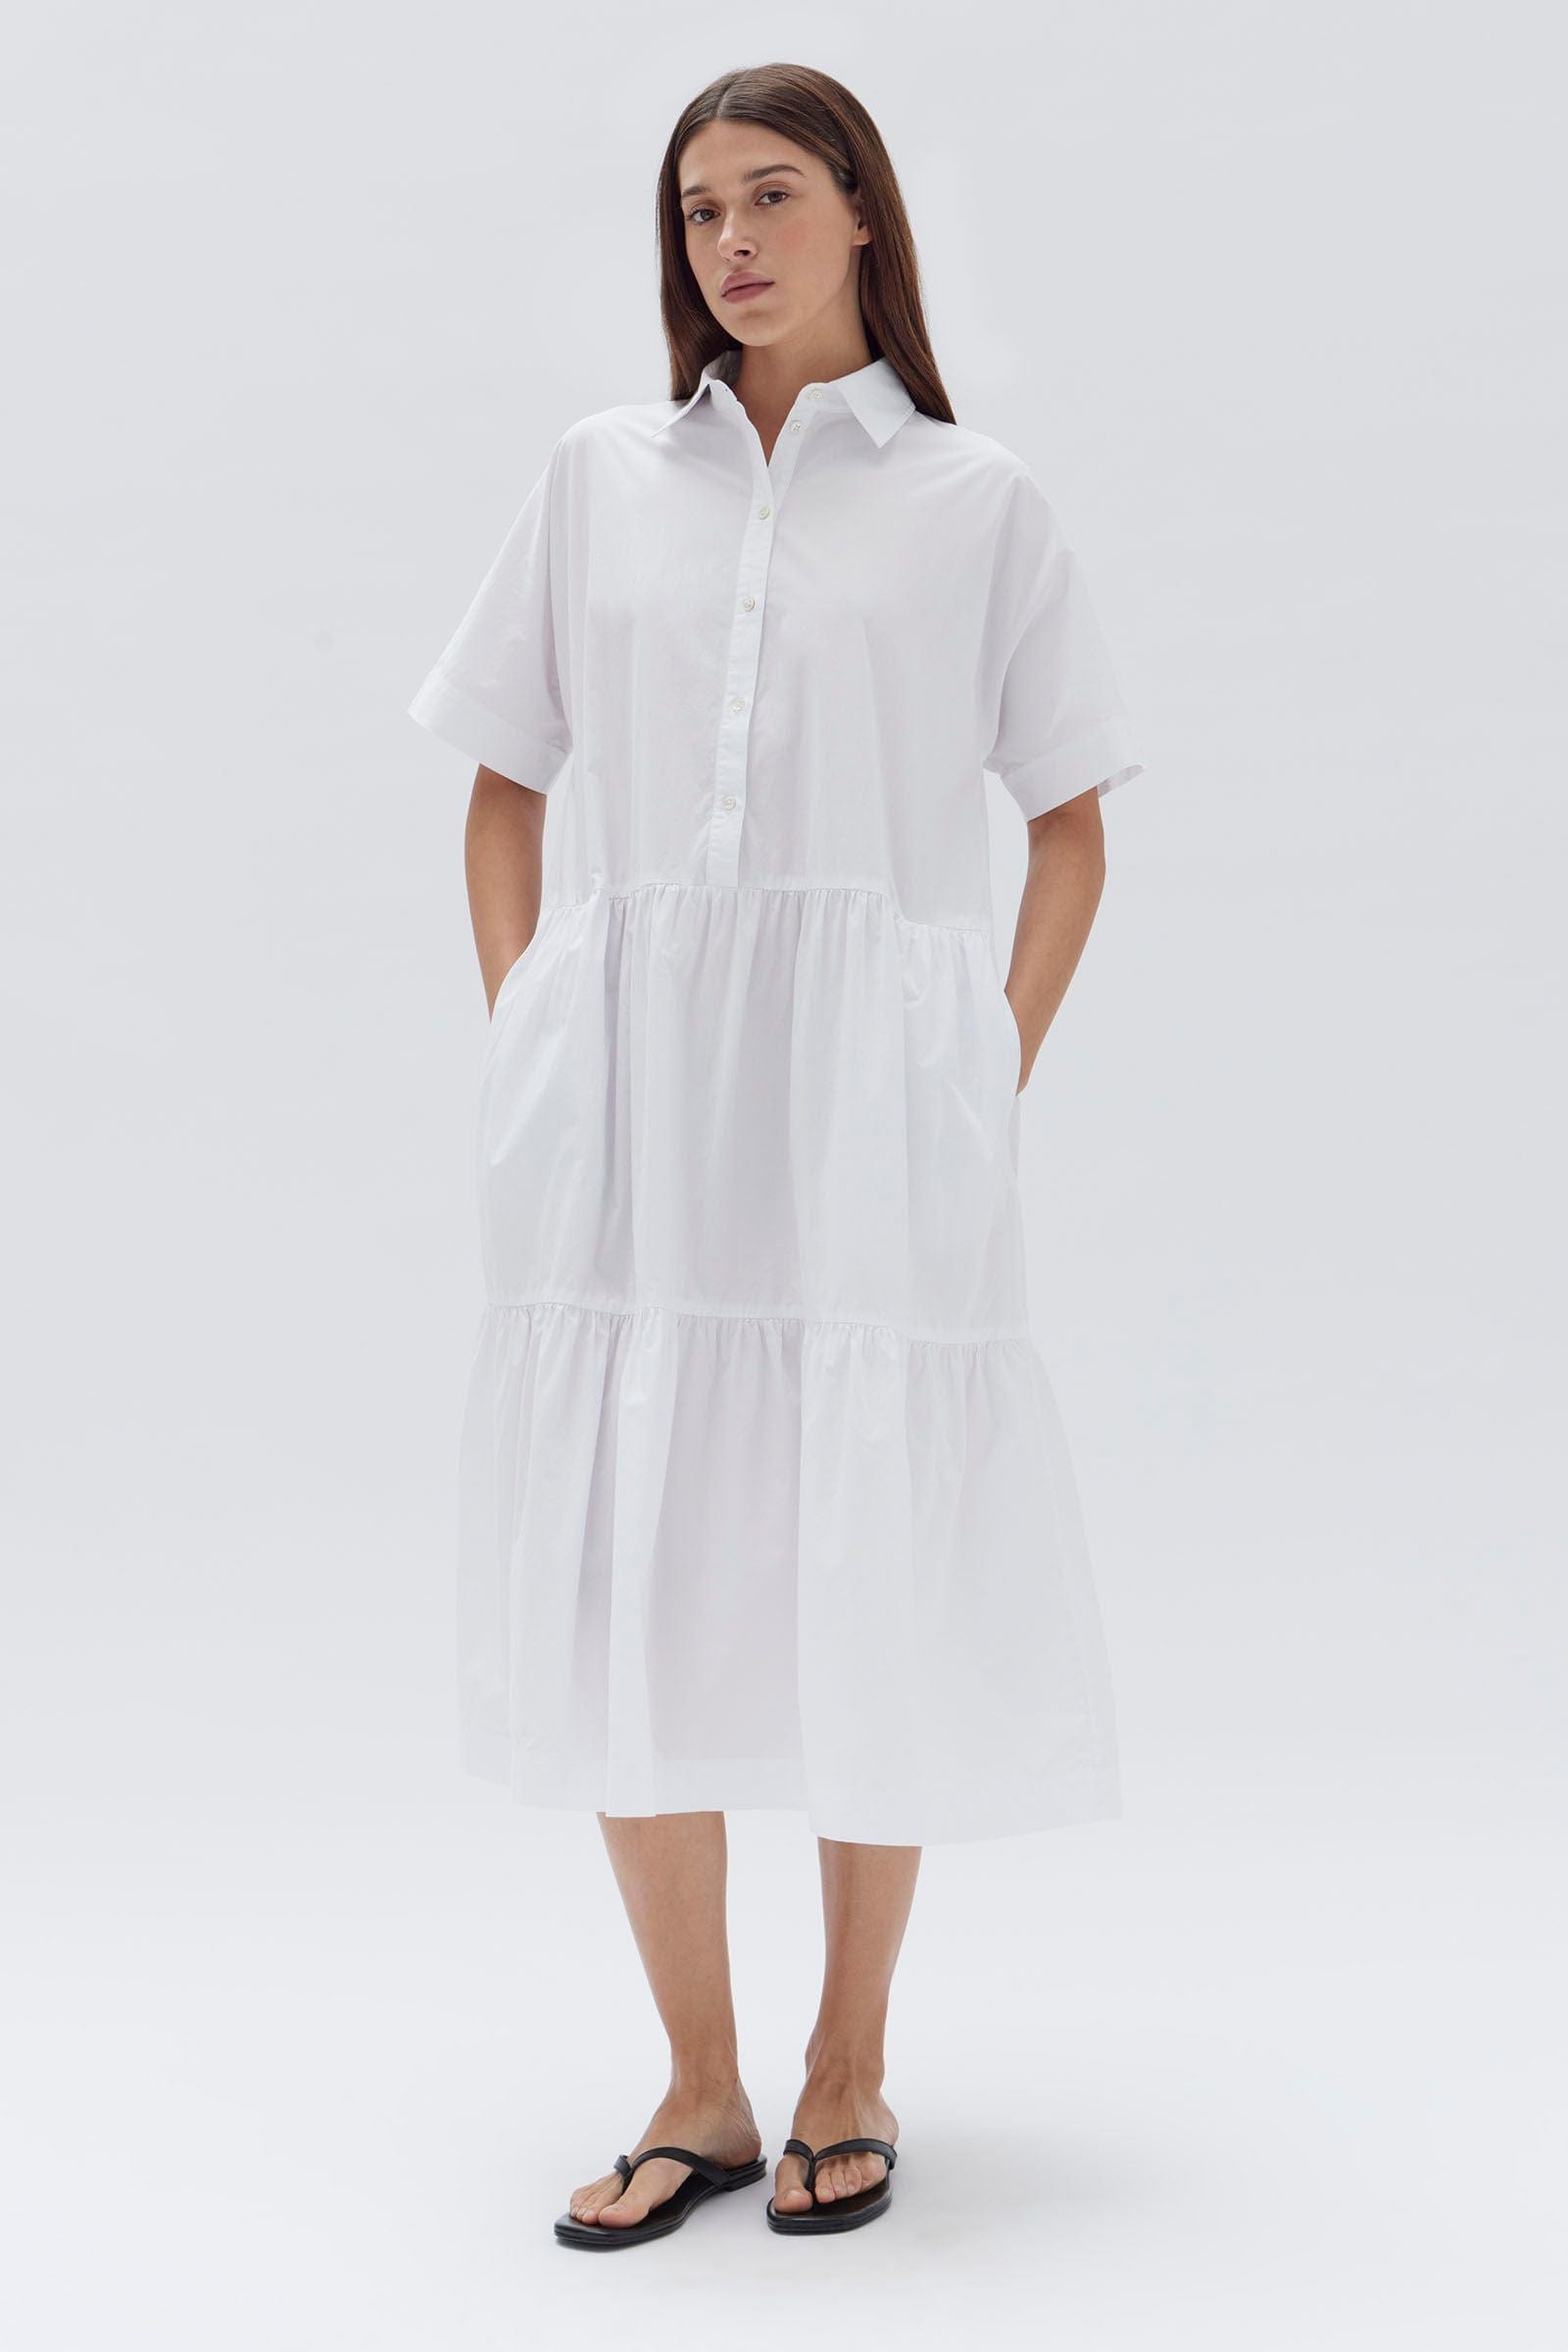 Assembly Label Dresses - Casual Assembly Label | Tiered Poplin Shirt Dress - White